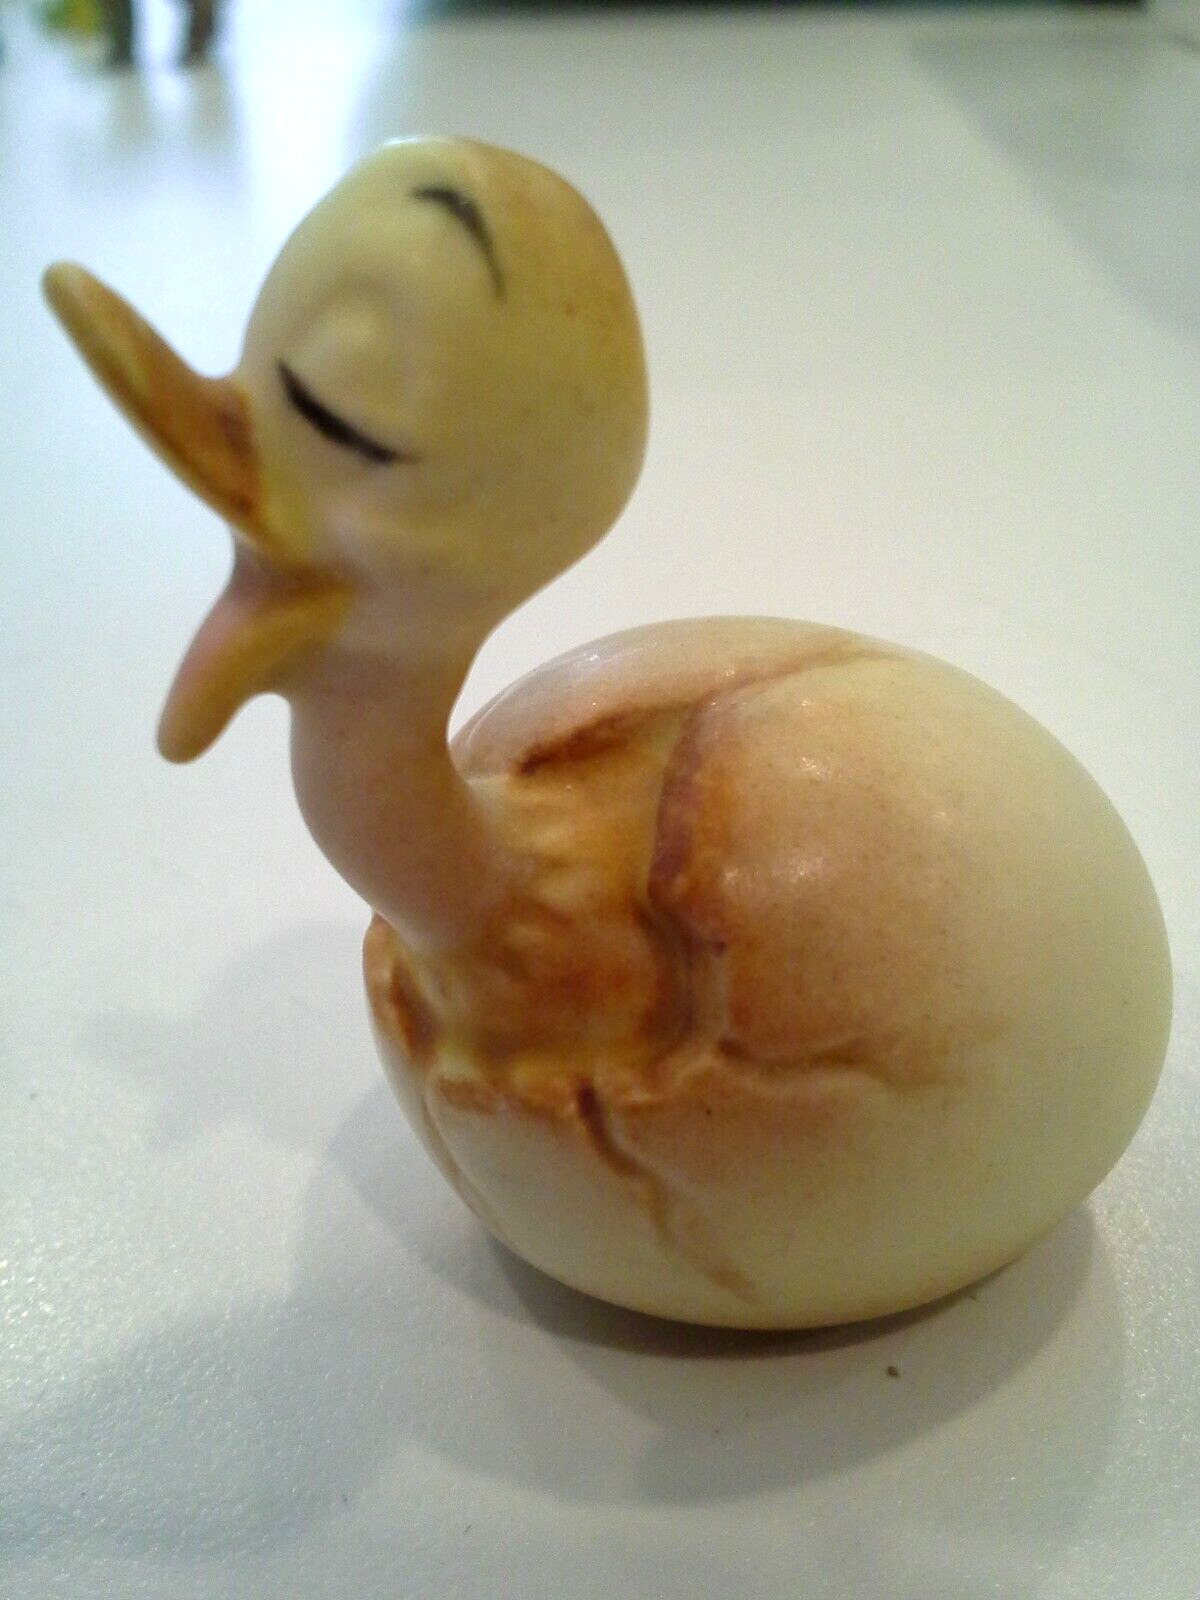 Vintage baby duckling breaking out of egg miniature figurine